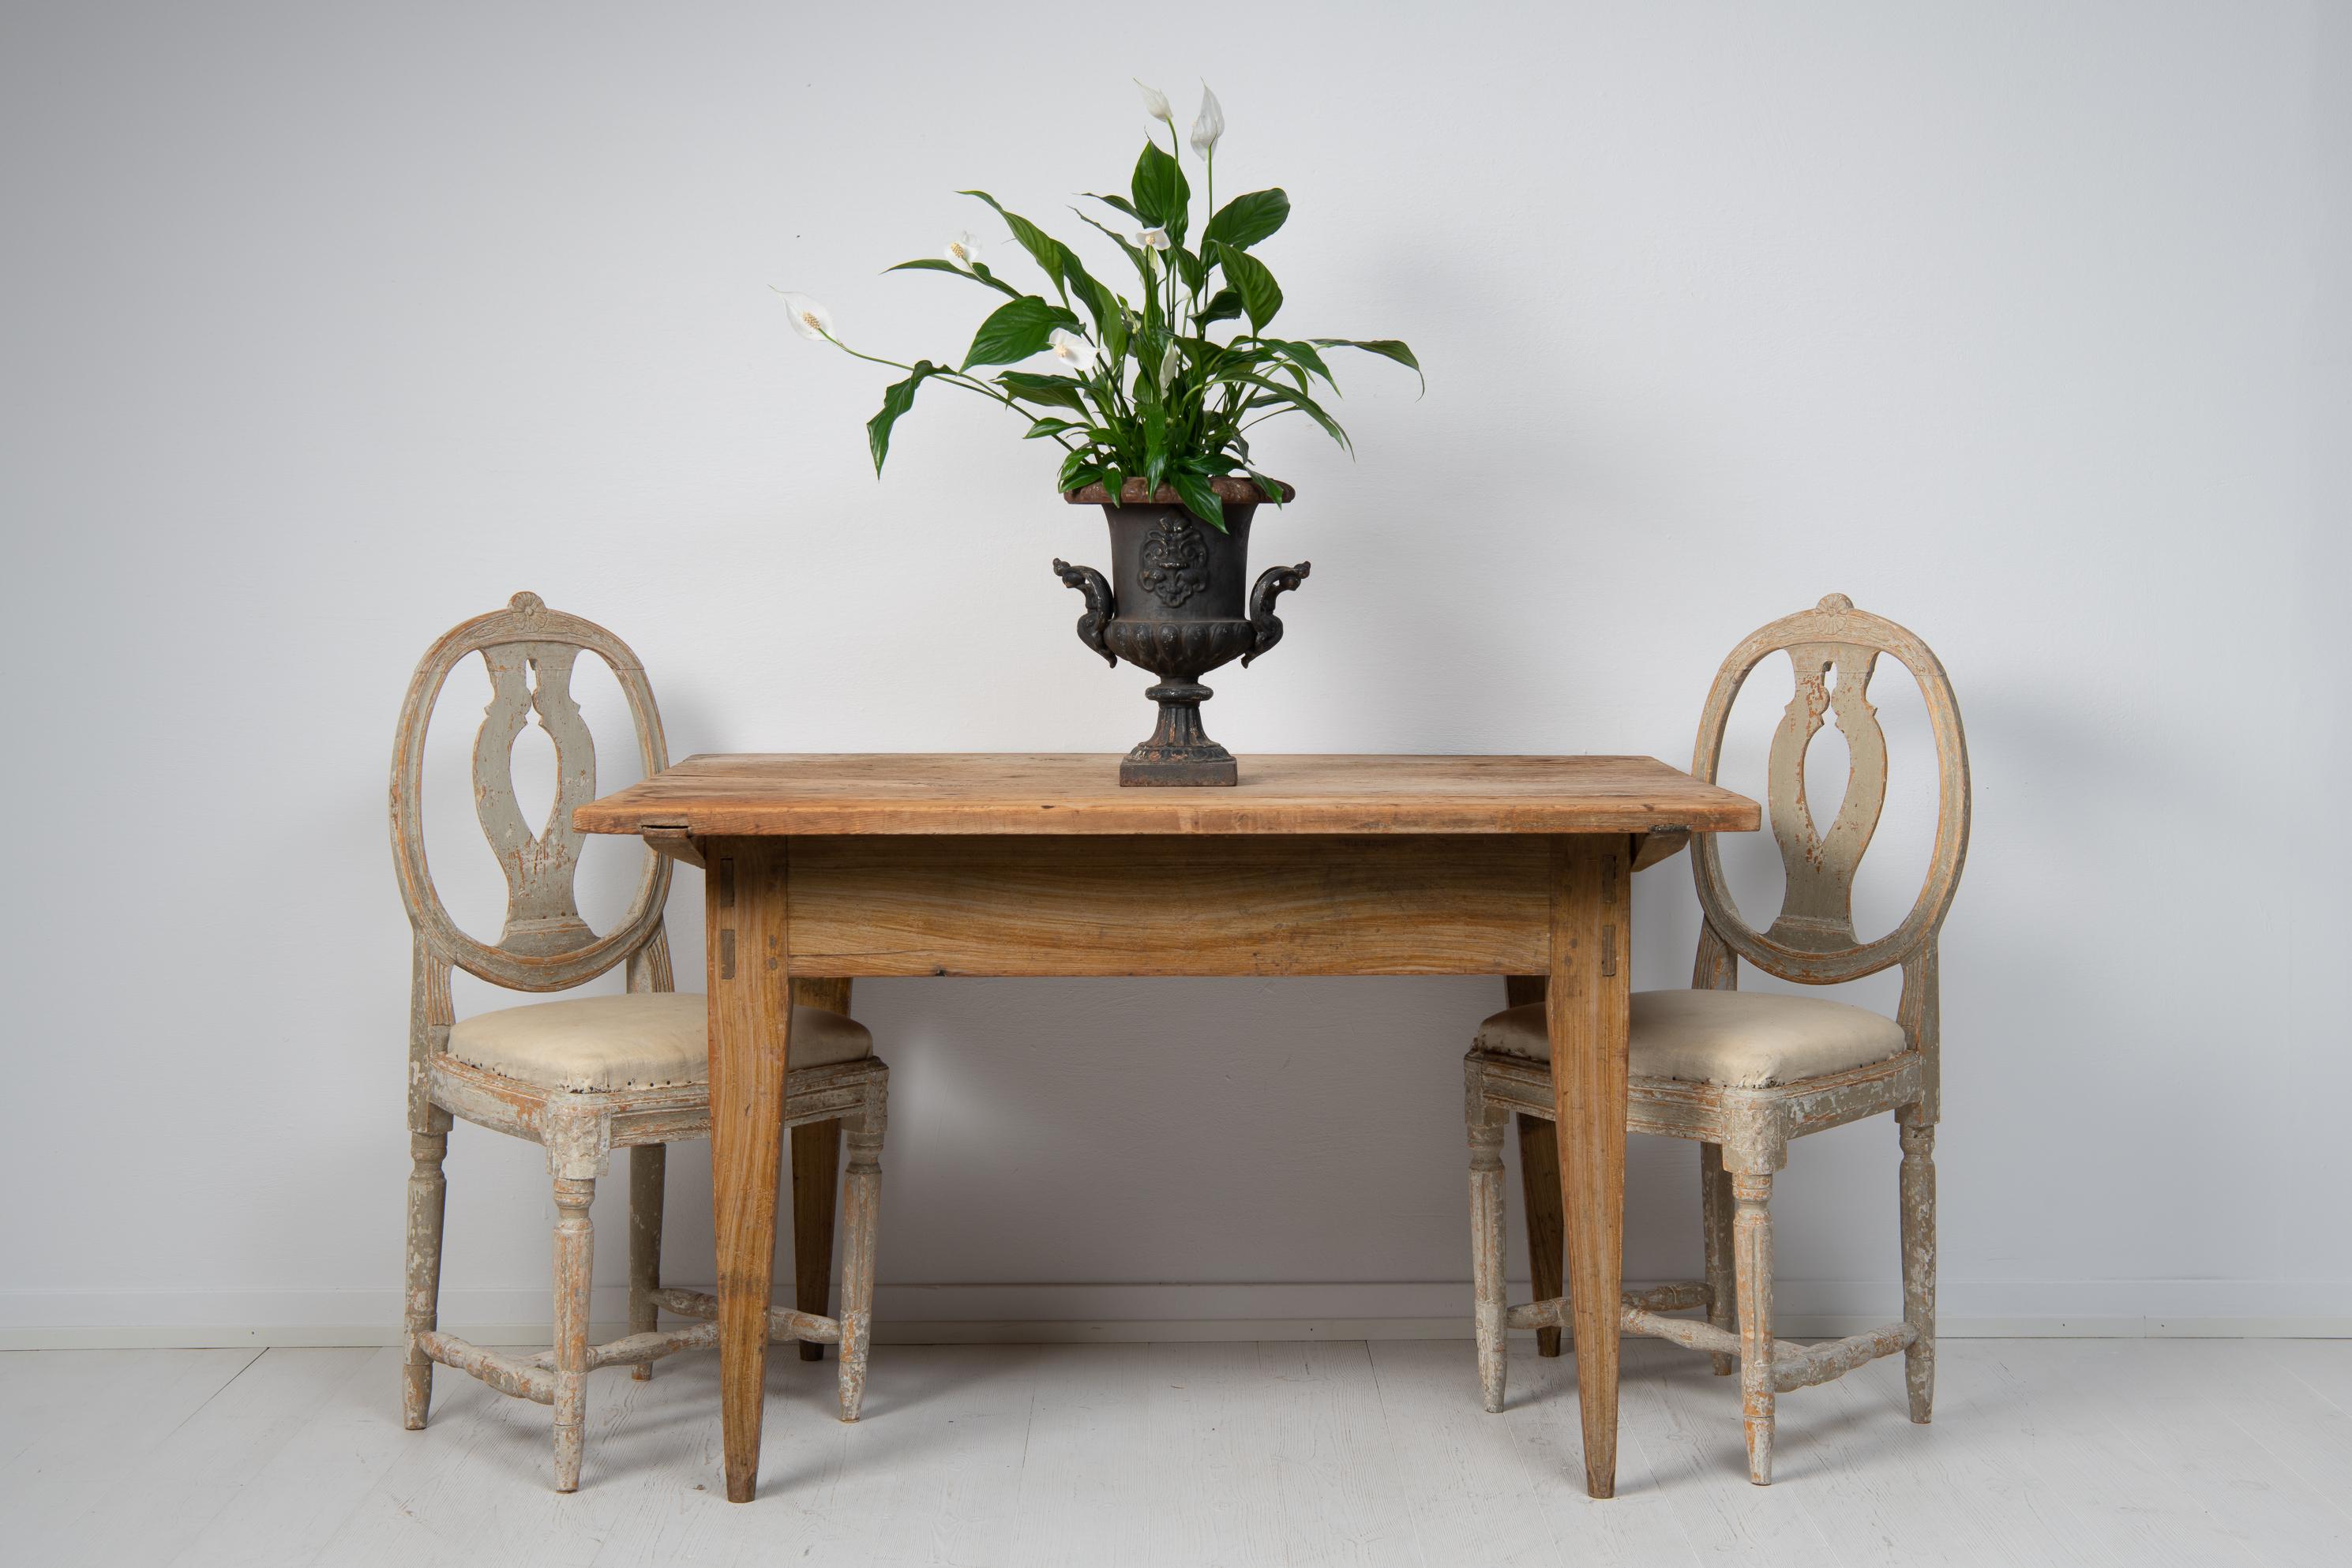 Swedish work or dining table in folk art from the early 19th century, around 1820. The table is a Swedish antique, genuine and honest with a solid frame and simple design. The proportions are charming with a slightly oversized table top and stable